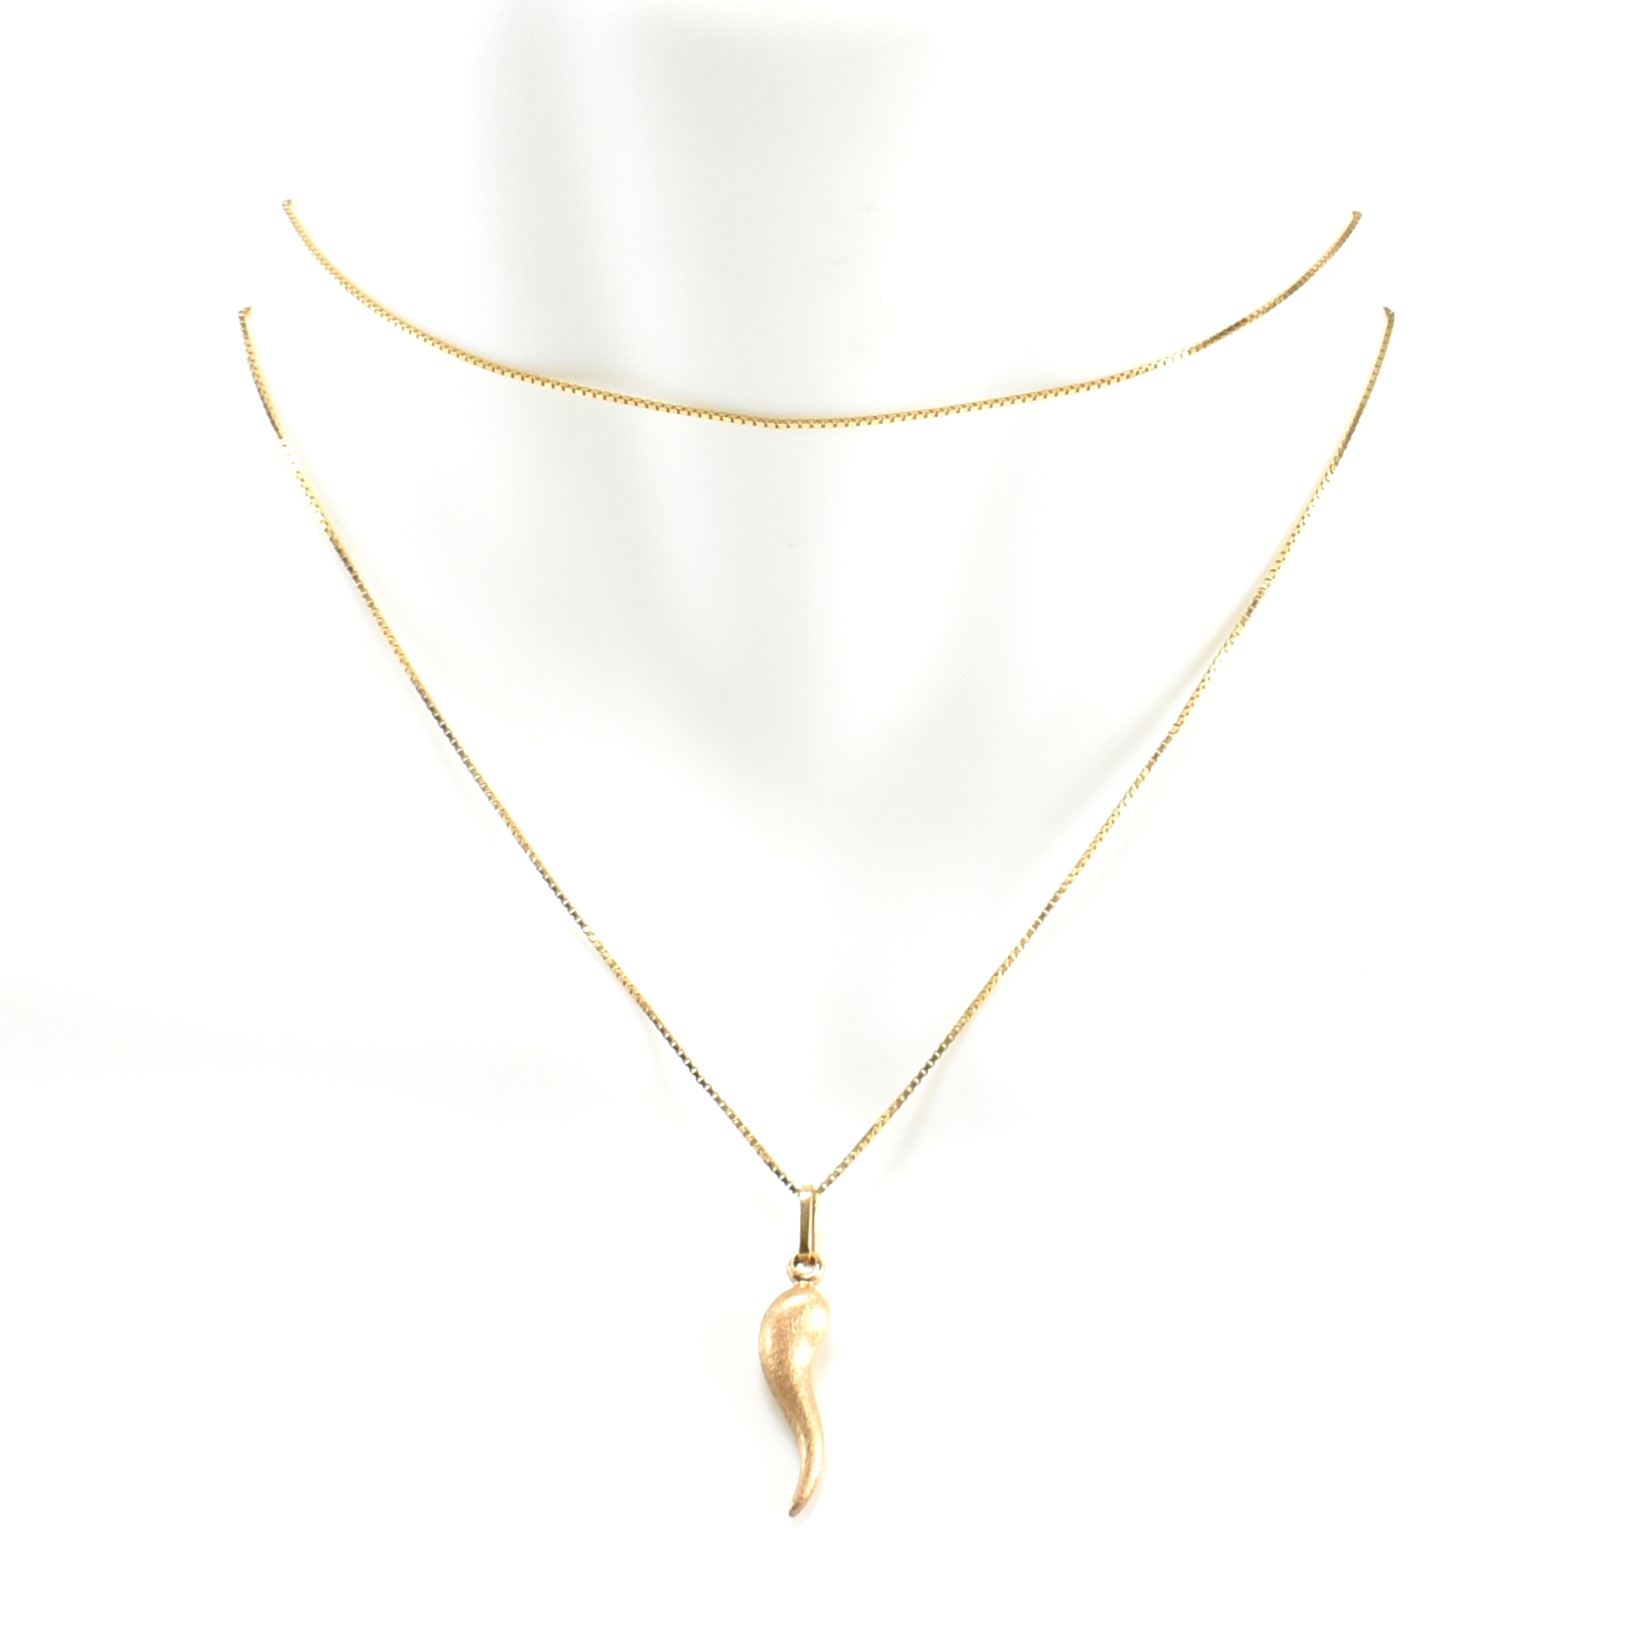 18CT GOLD PENDANT NECKLACE - Image 7 of 7